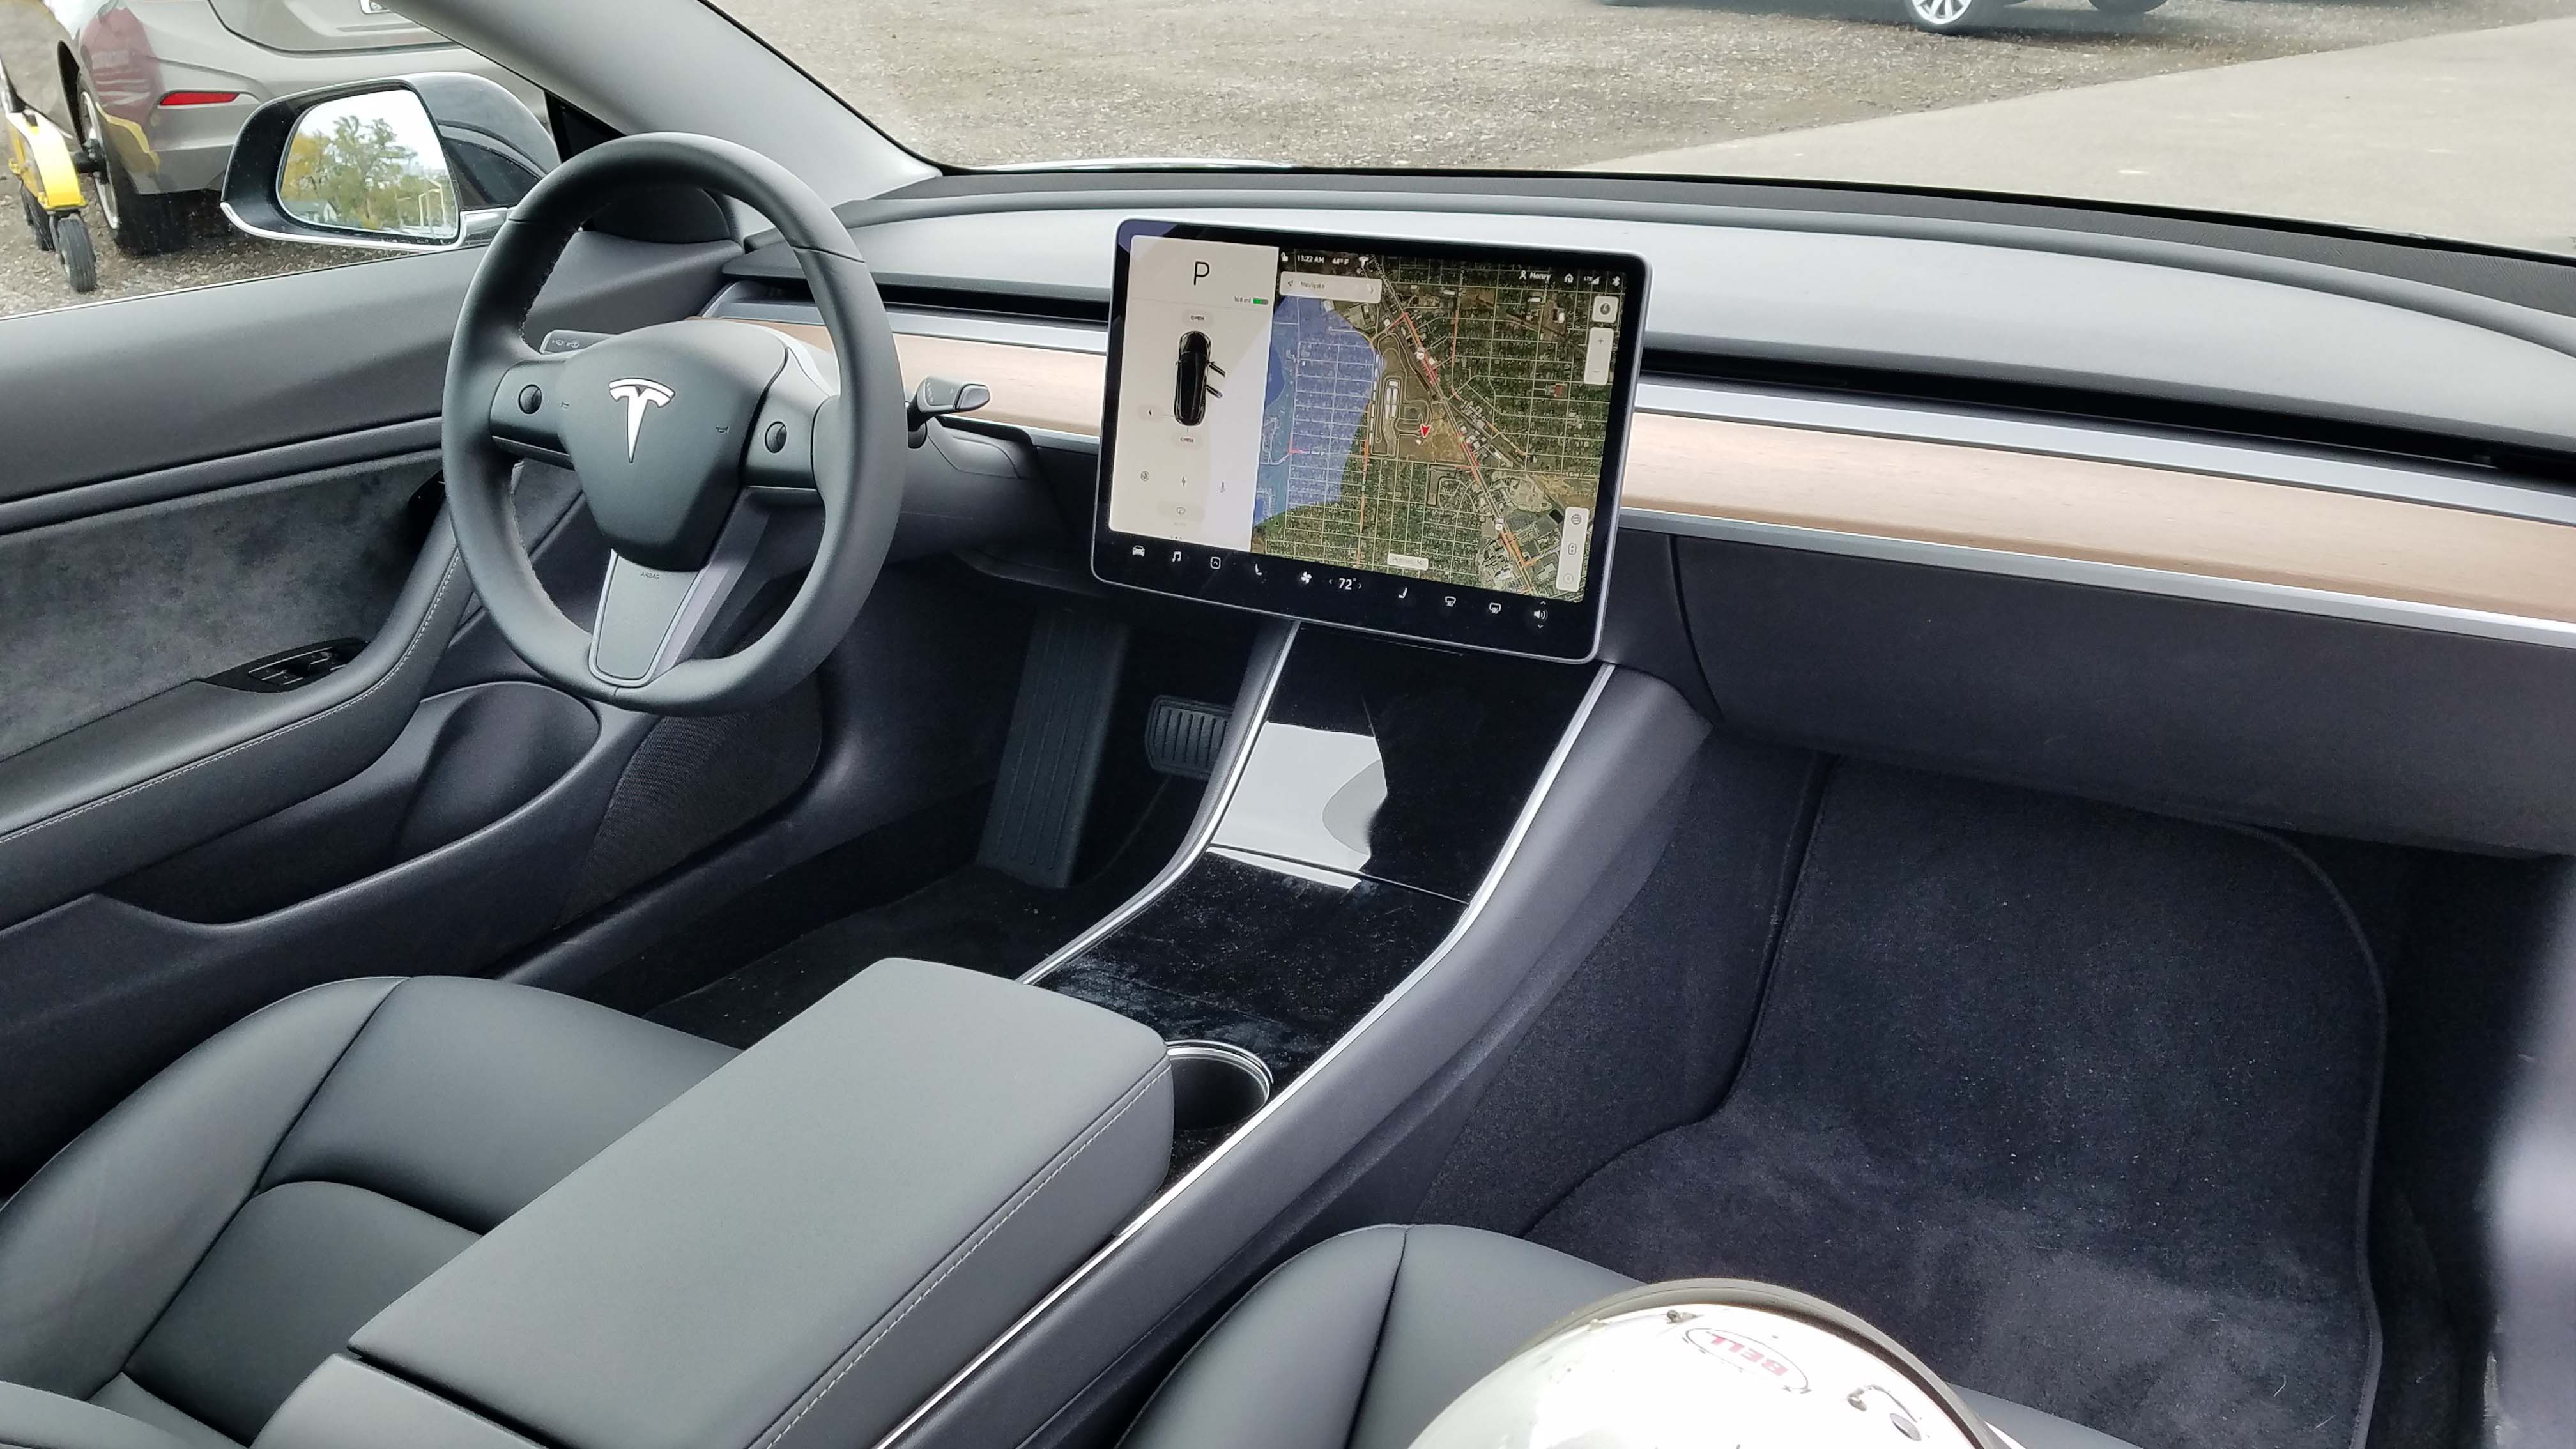 The Tesla Model 3 is almost entirely controlled via its 15-inch touchscreen — making it an iPhone on wheels with a unique automotive operating system.